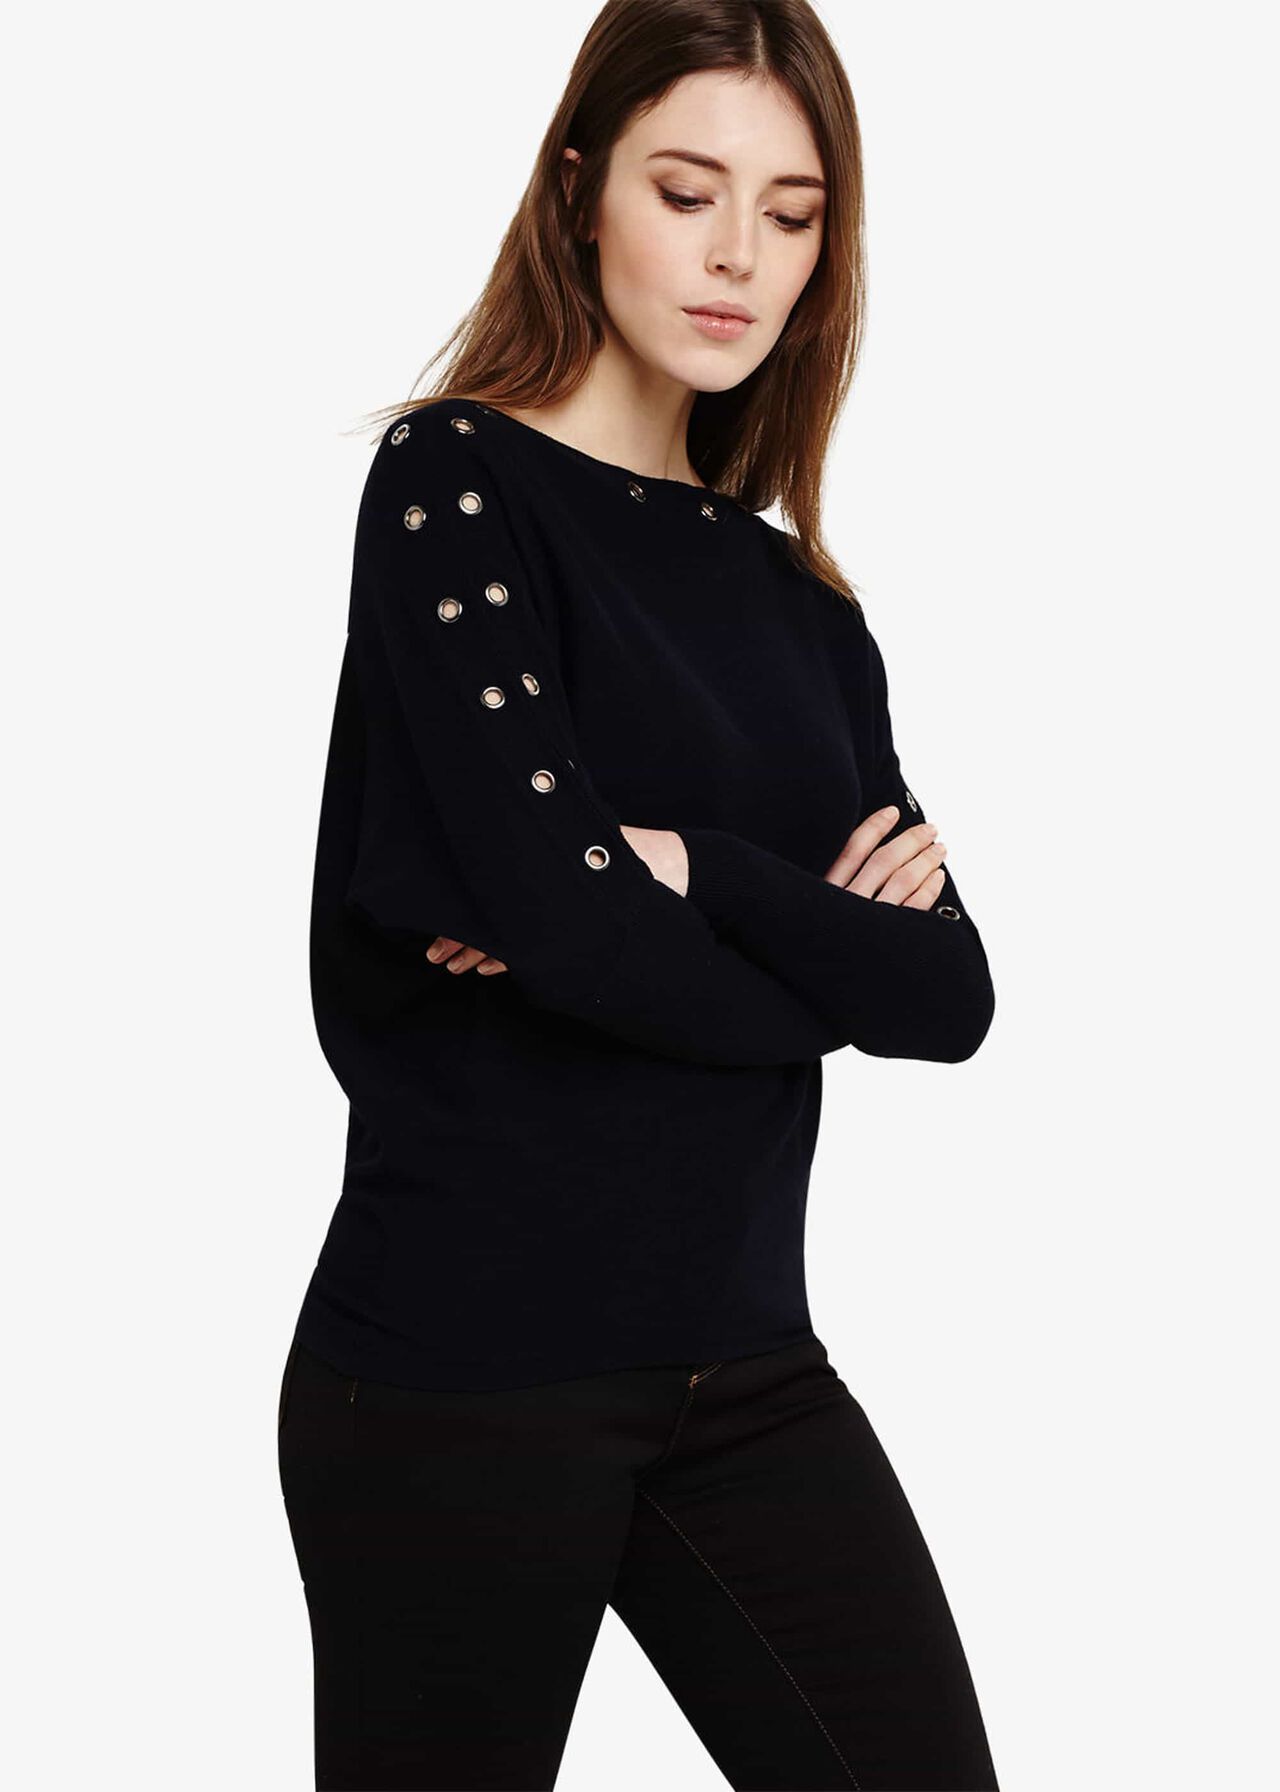 Esther Eyelet Batwing Knitted Top